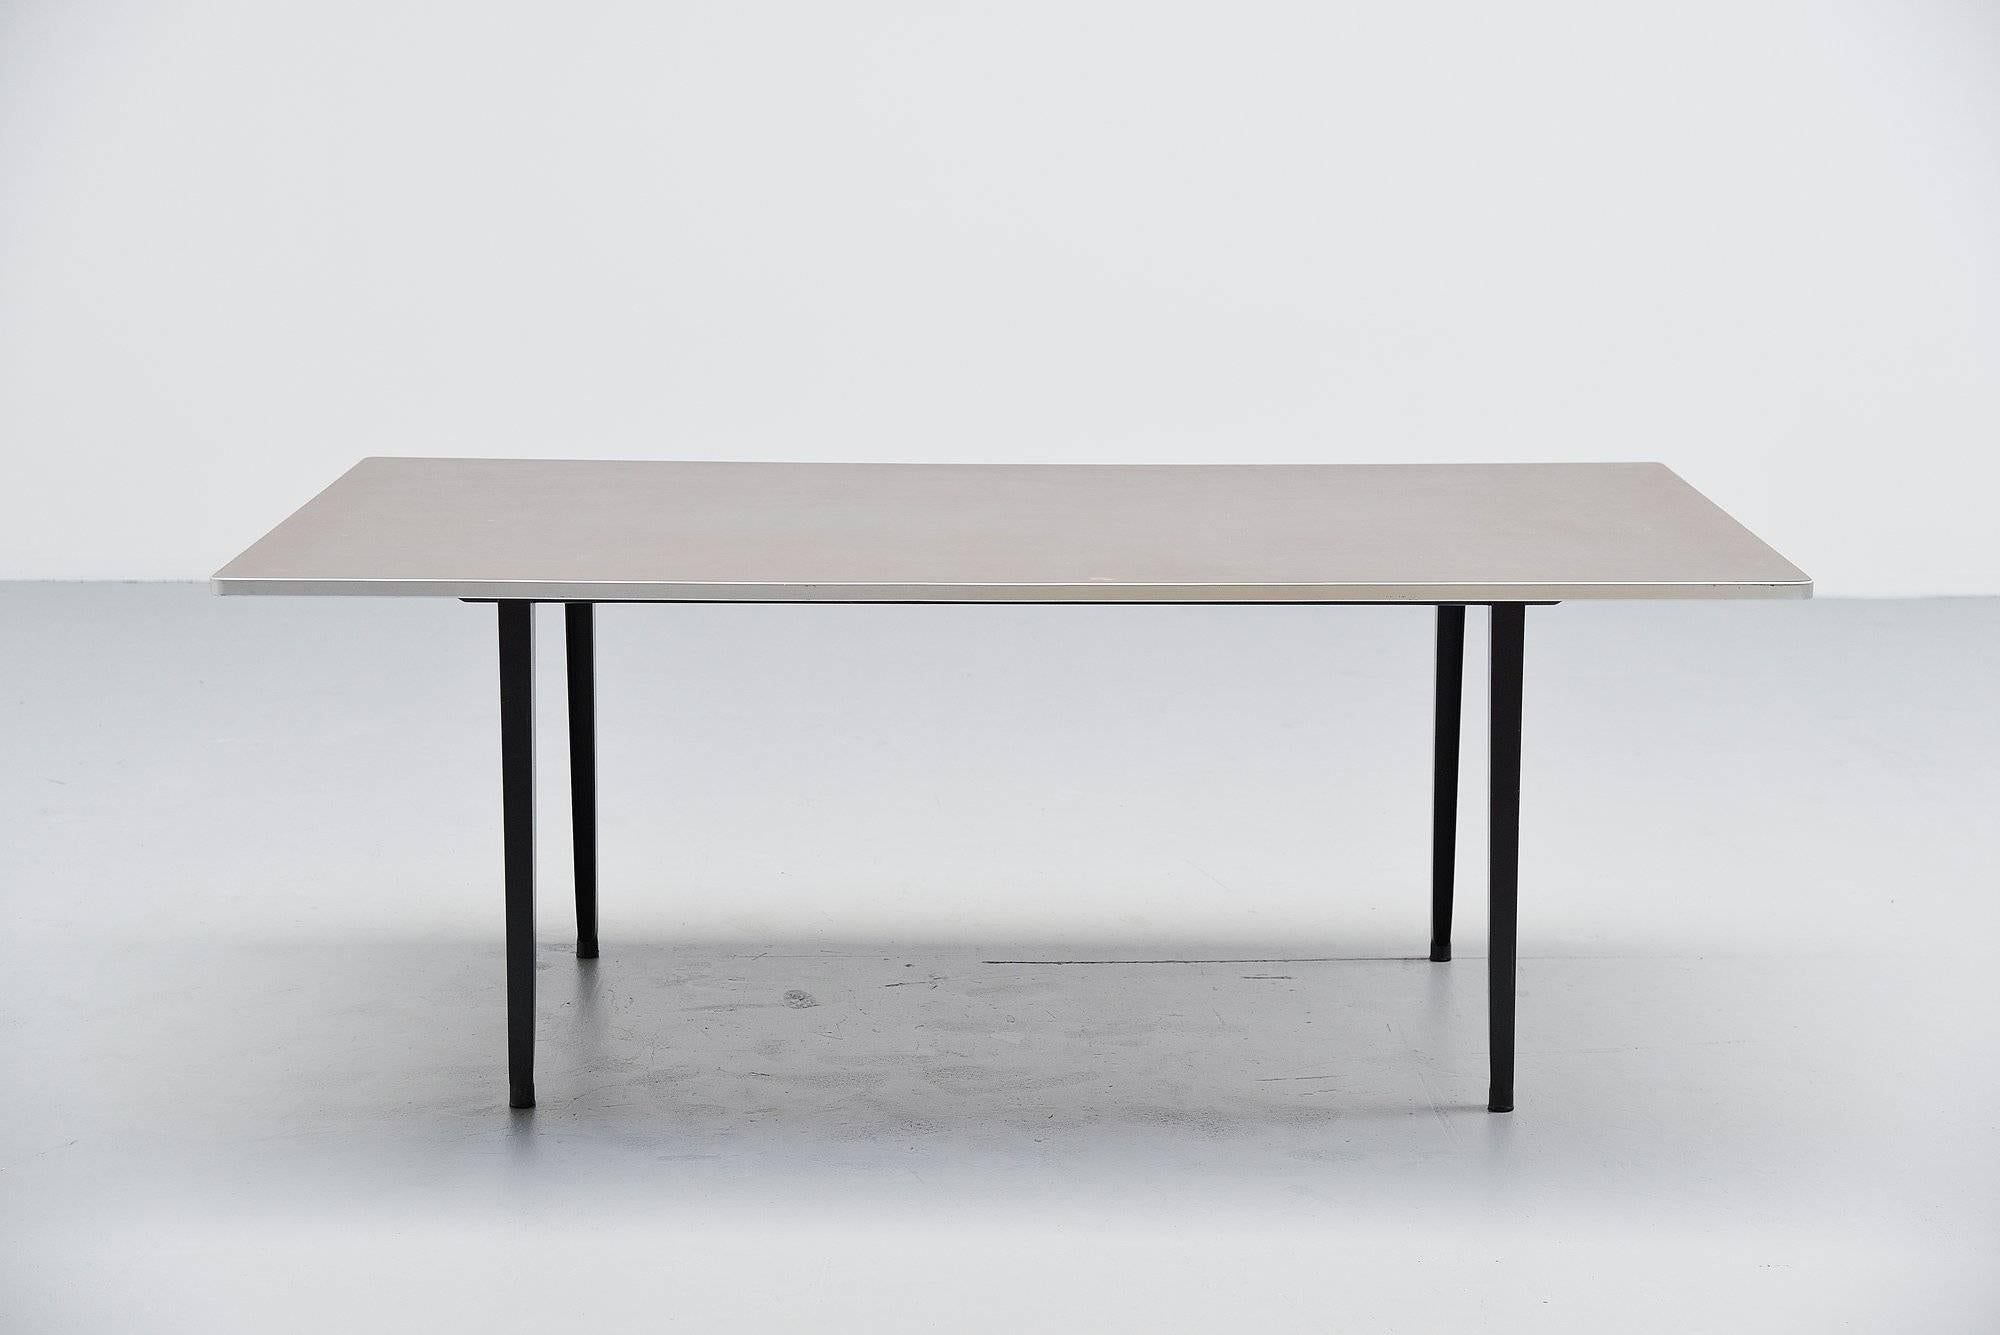 Nice and rare Industrial dining or working table designed by Friso Kramer for Ahrend de Cirkel, Holland, 1955. This table is the second largest version made, 200 cm long top. This has a rectangular shaped top, finished with dark grey linoleum and an